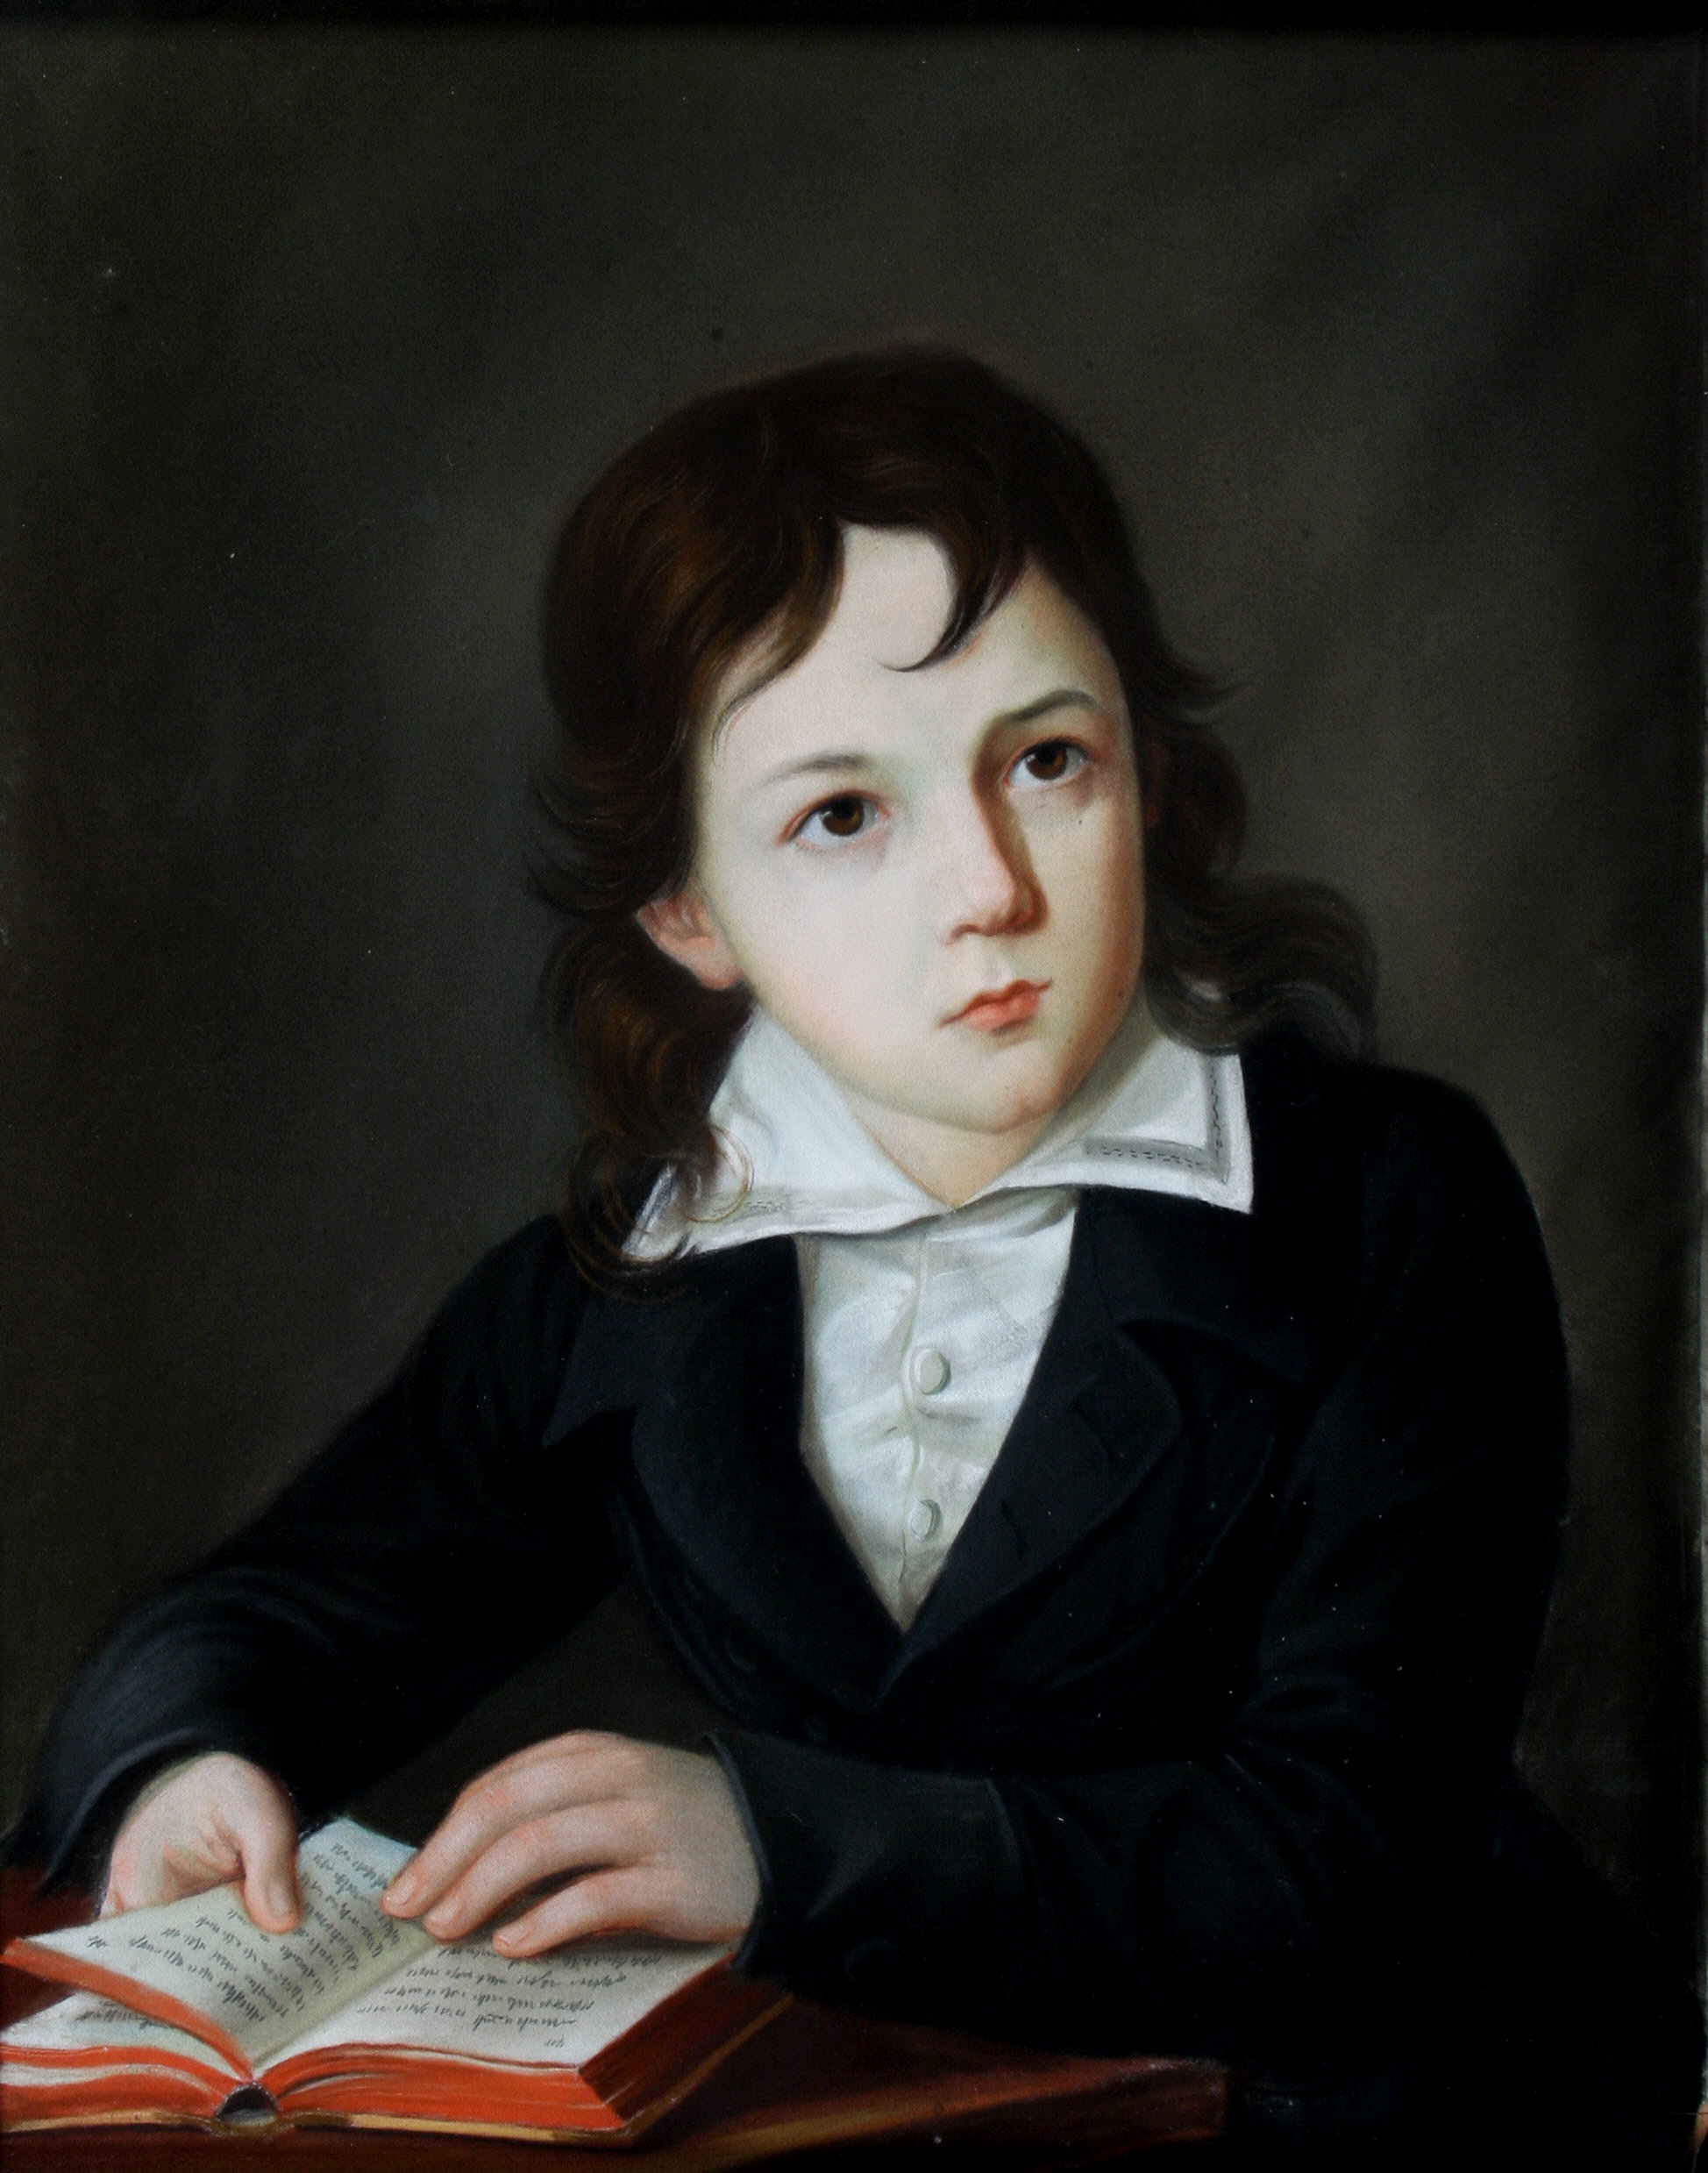 Portrait of a boy at his desk holding a book 19c